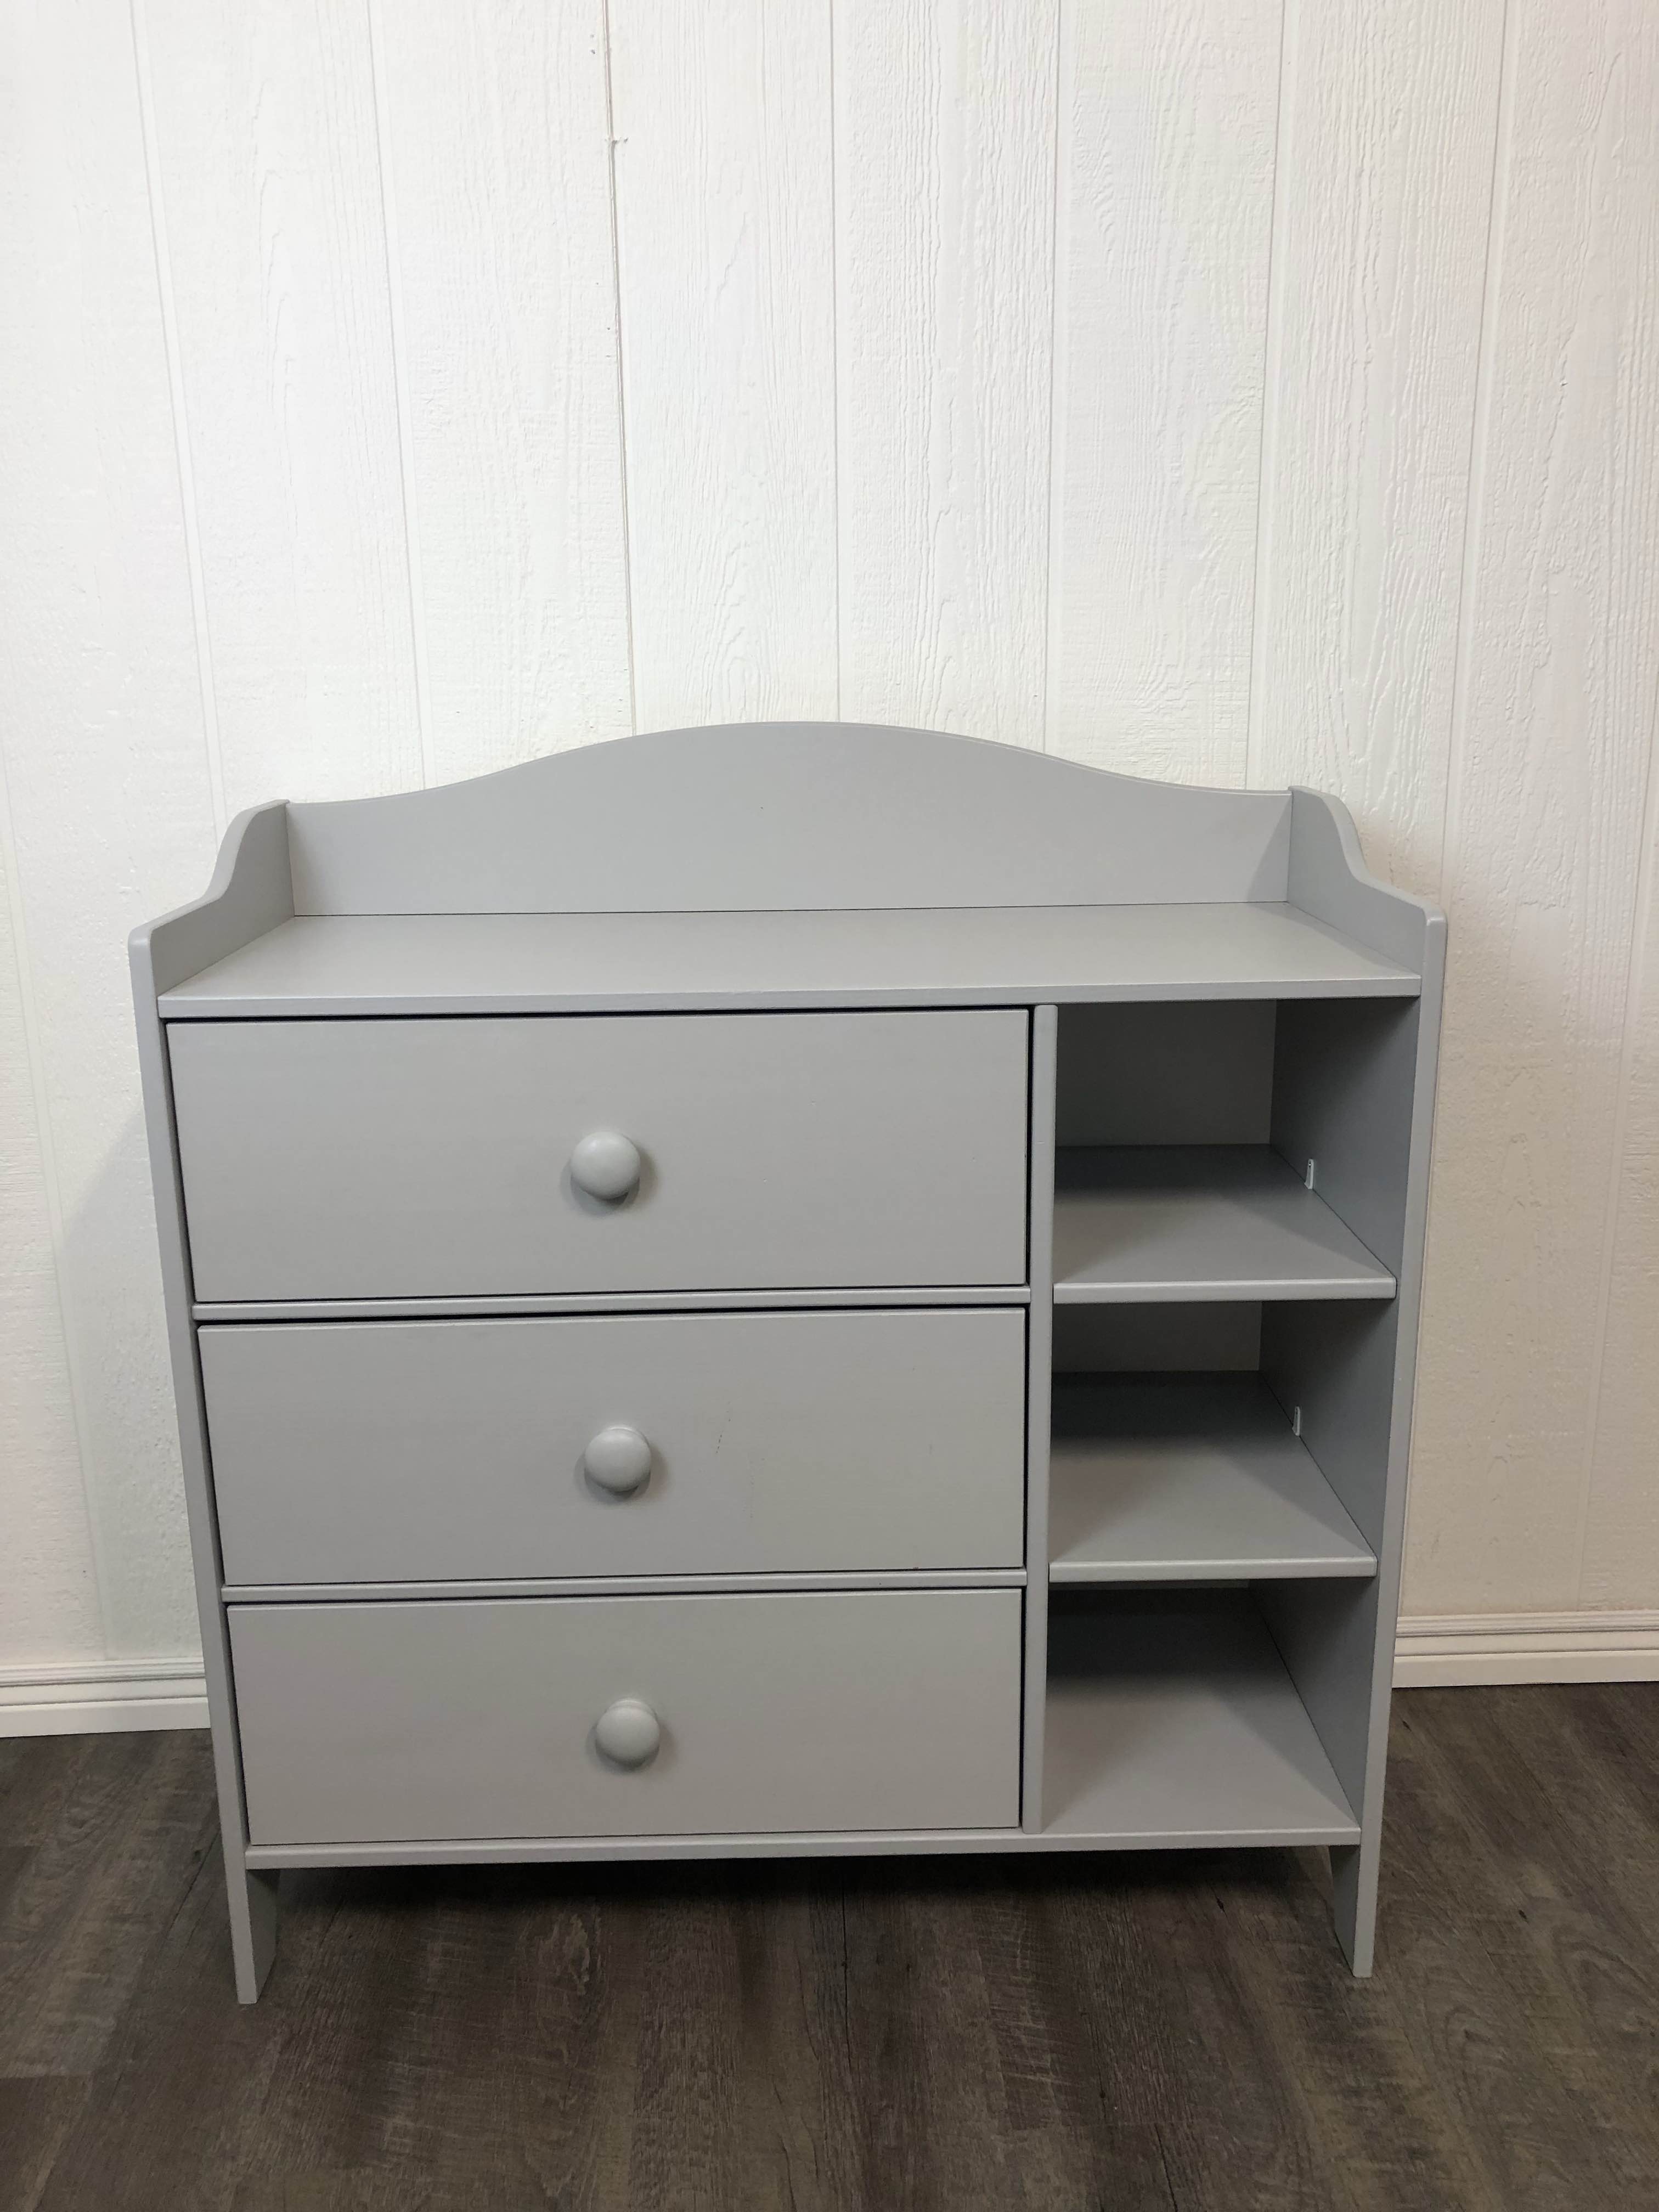 Ikea Trogen Chest Of Drawers